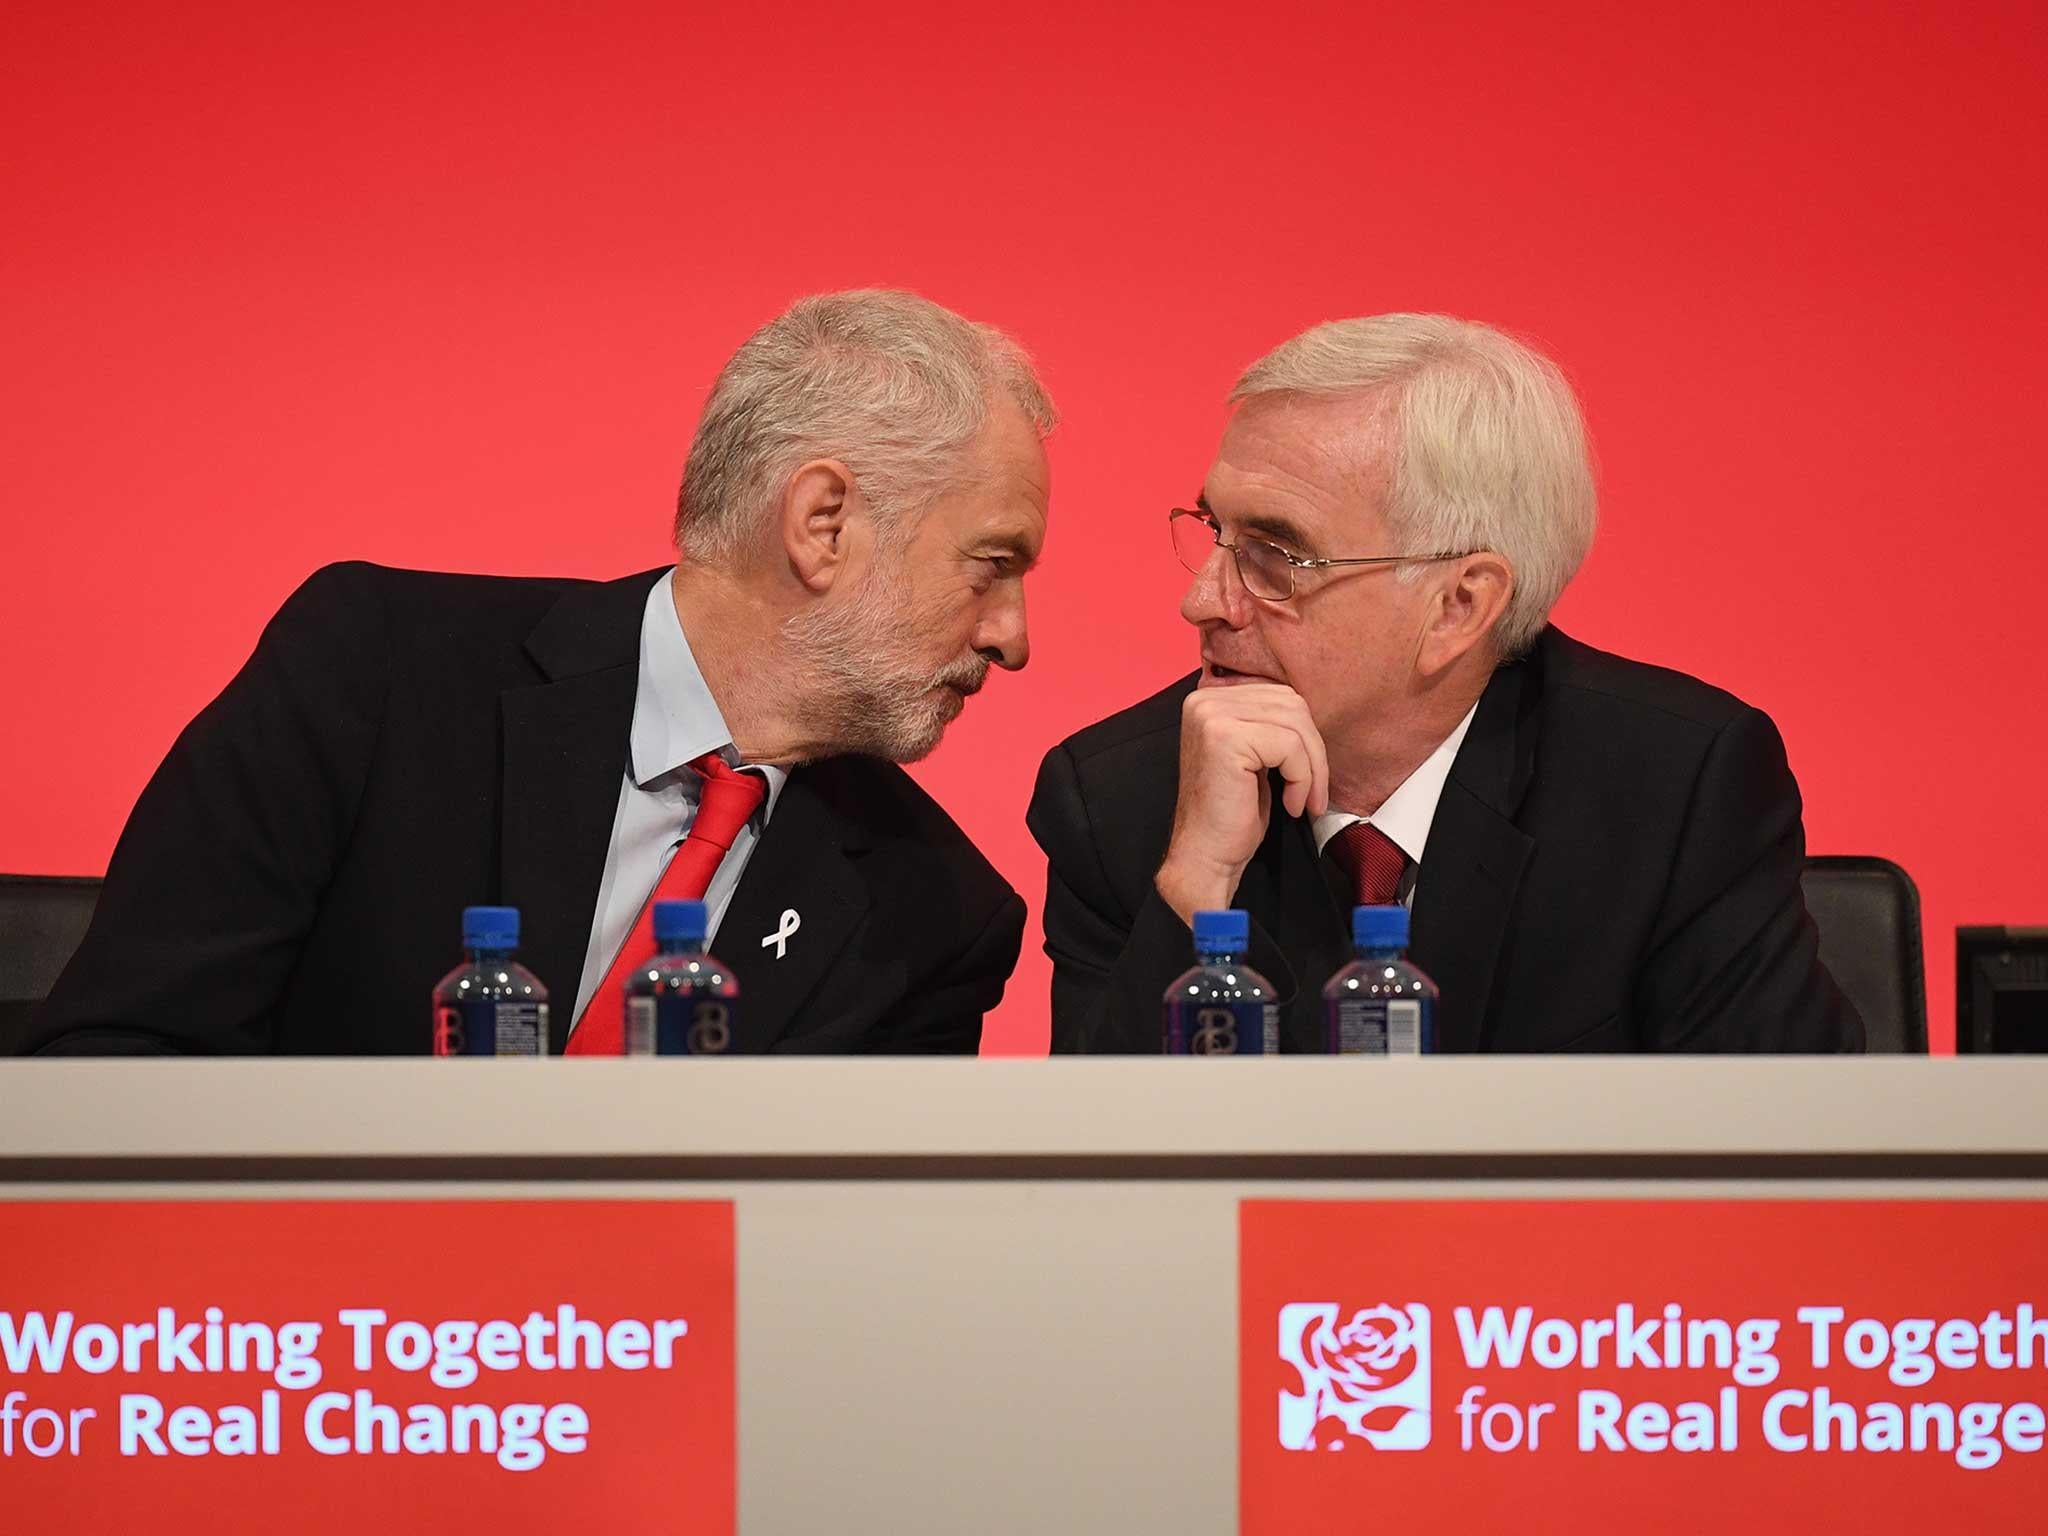 John McDonnell is a close all of Labour leader Jeremy Corbyn